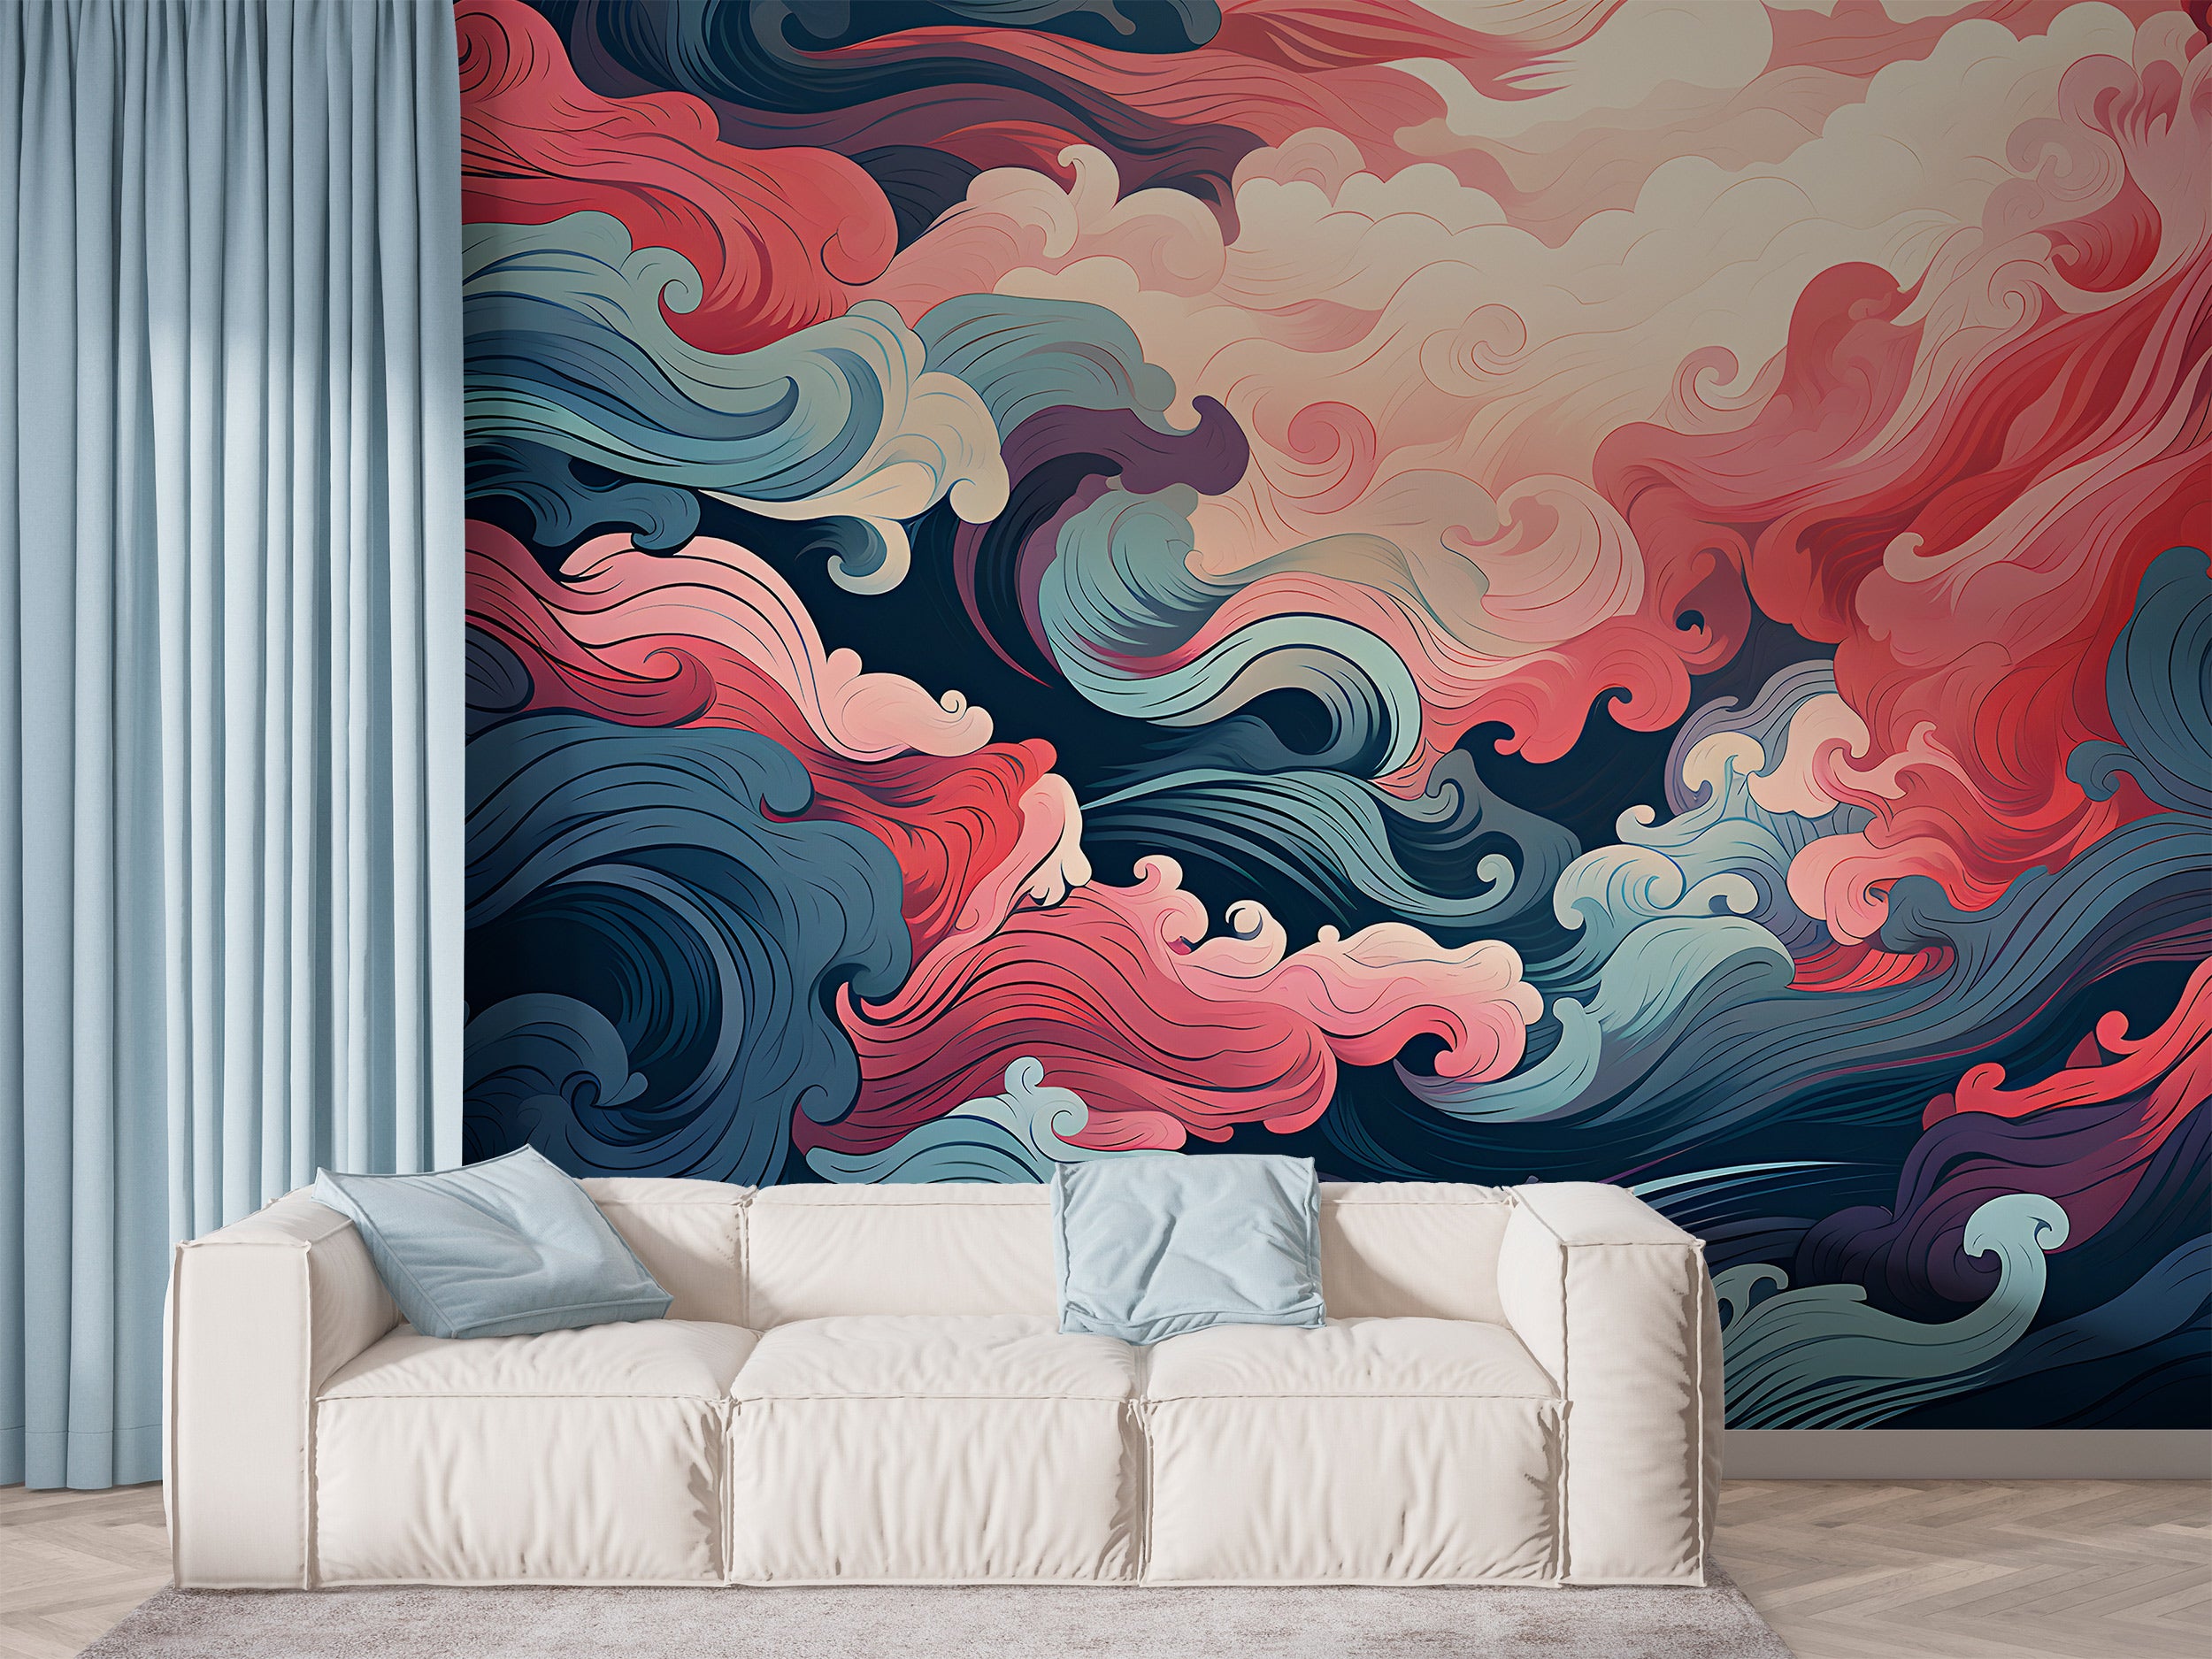 Colorful Wave Wallpaper for Vibrant Home Decor